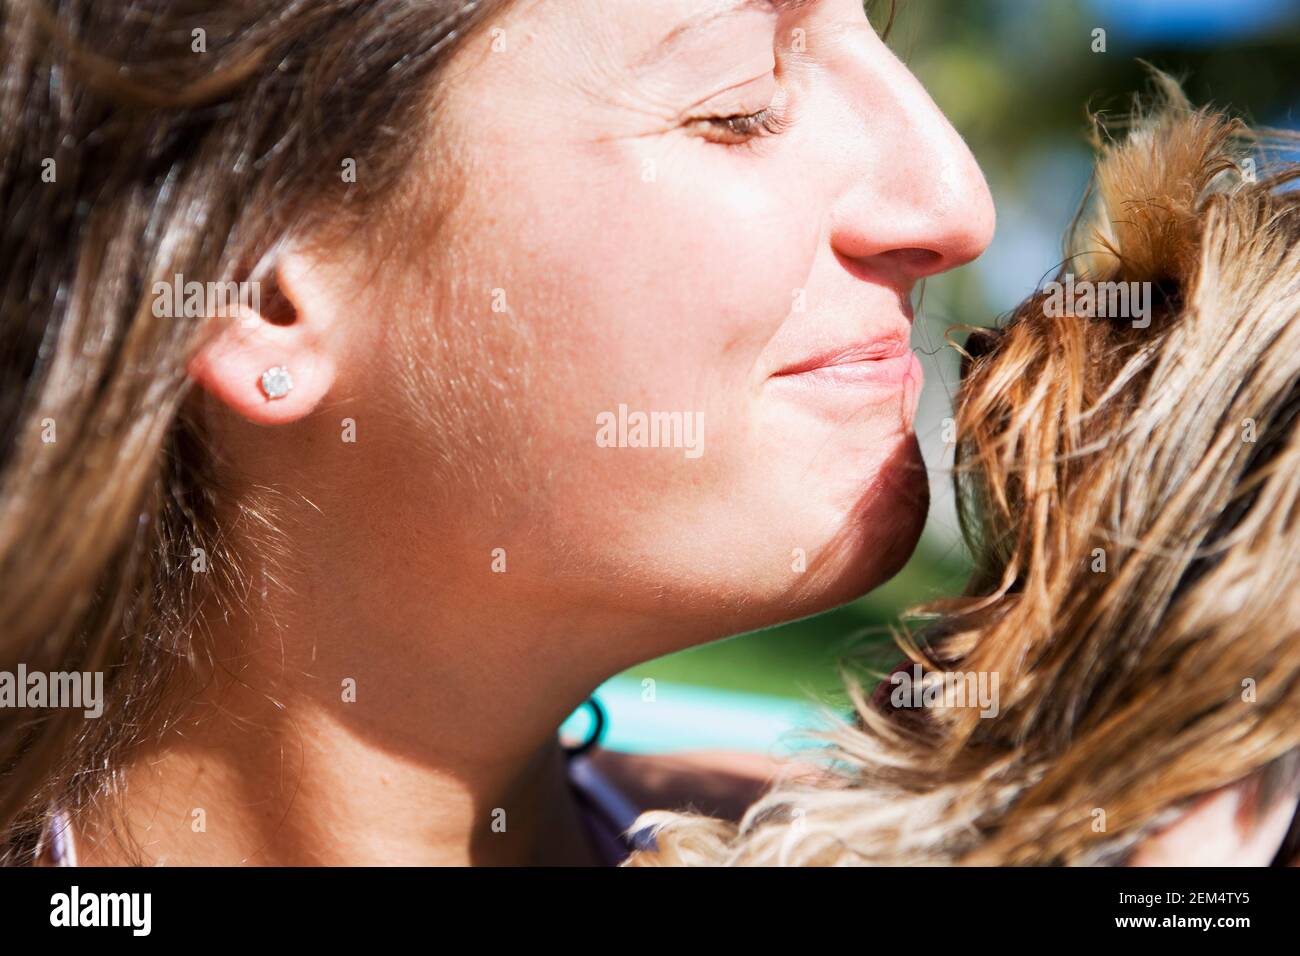 Close-up of a young woman and her dog Stock Photo